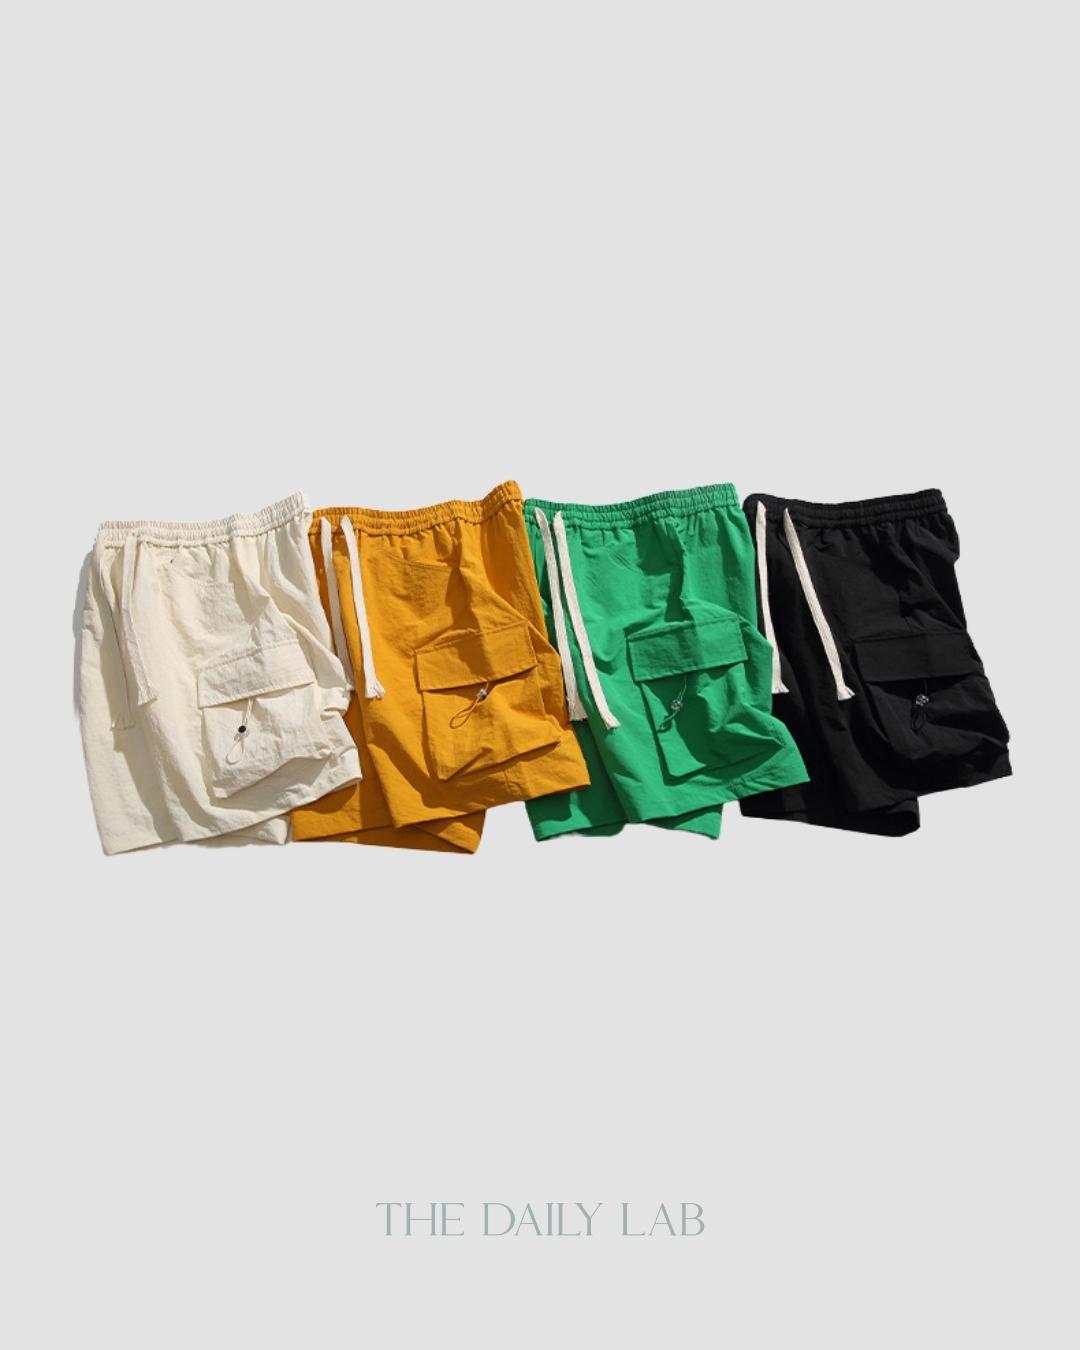 CoolMax Quick-Dry Utility Shorts in Green